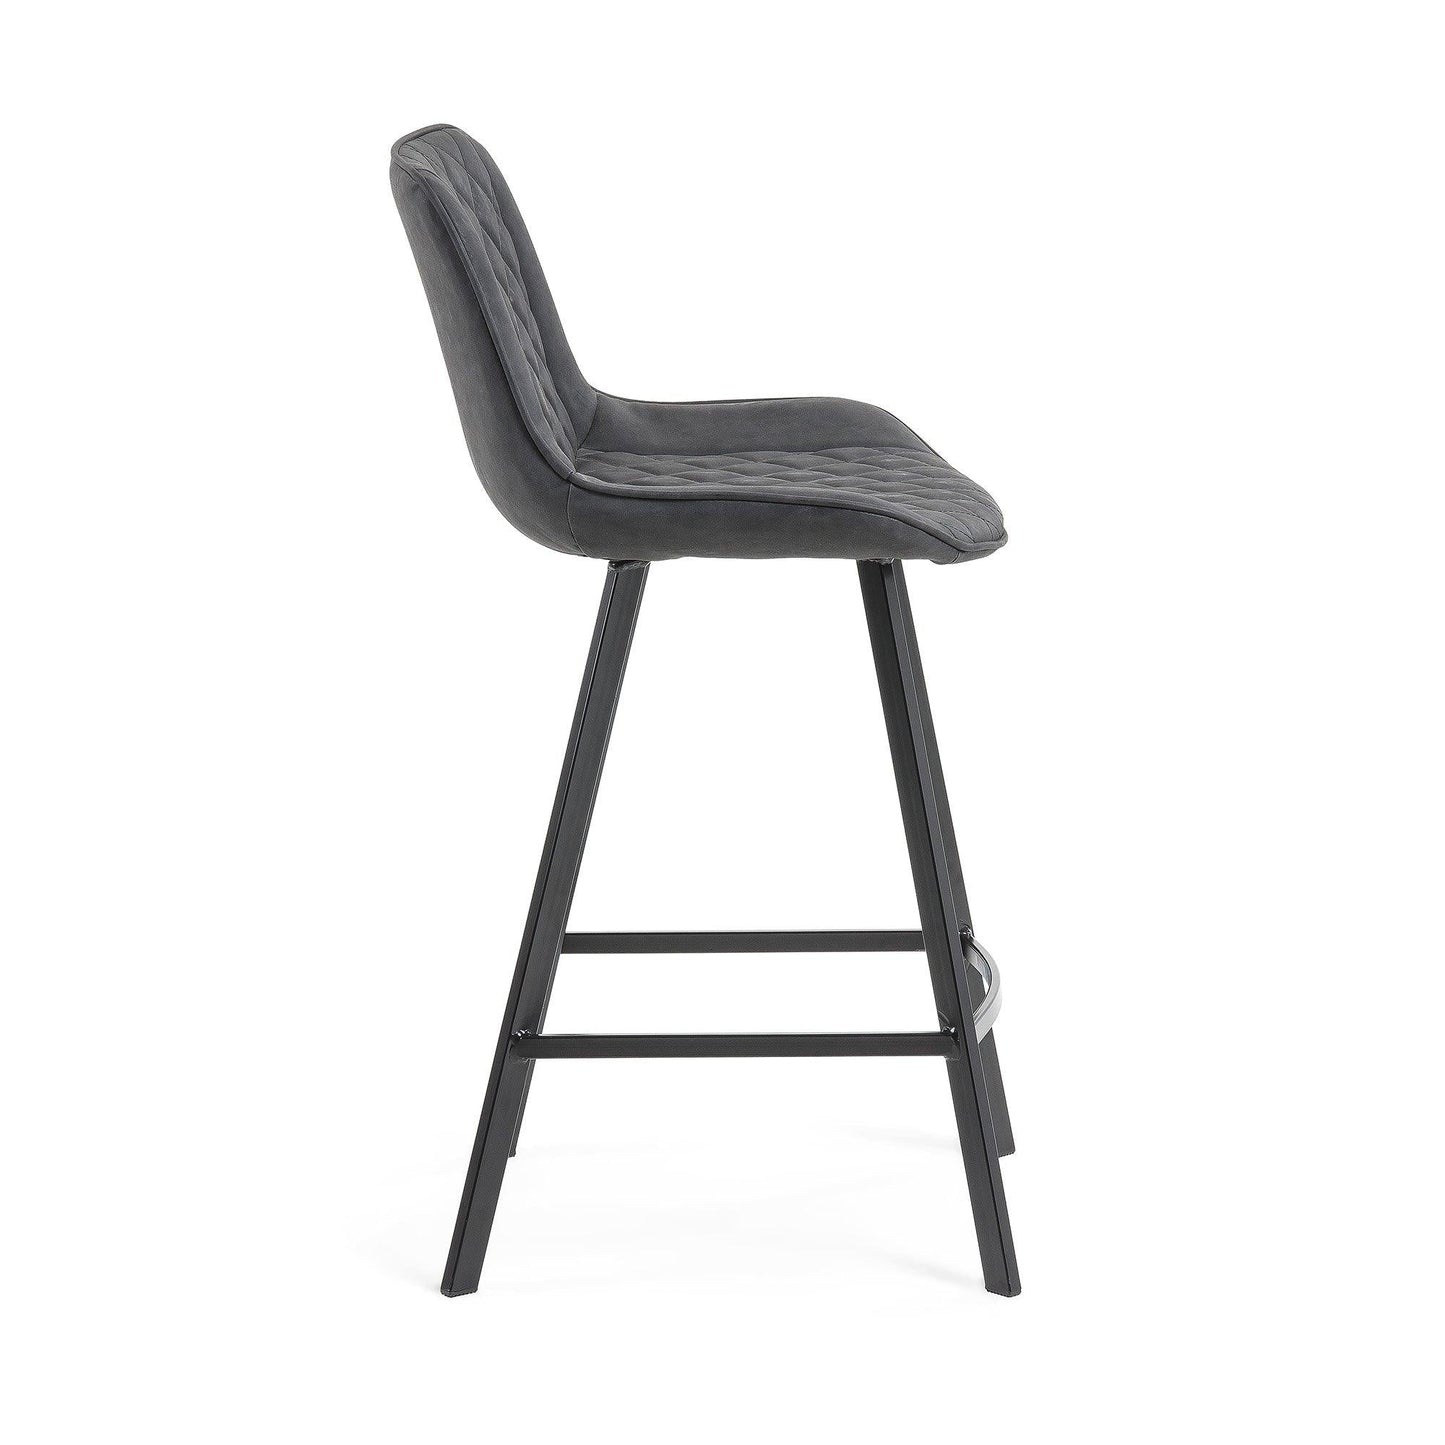 Synthetic Leather Barstool